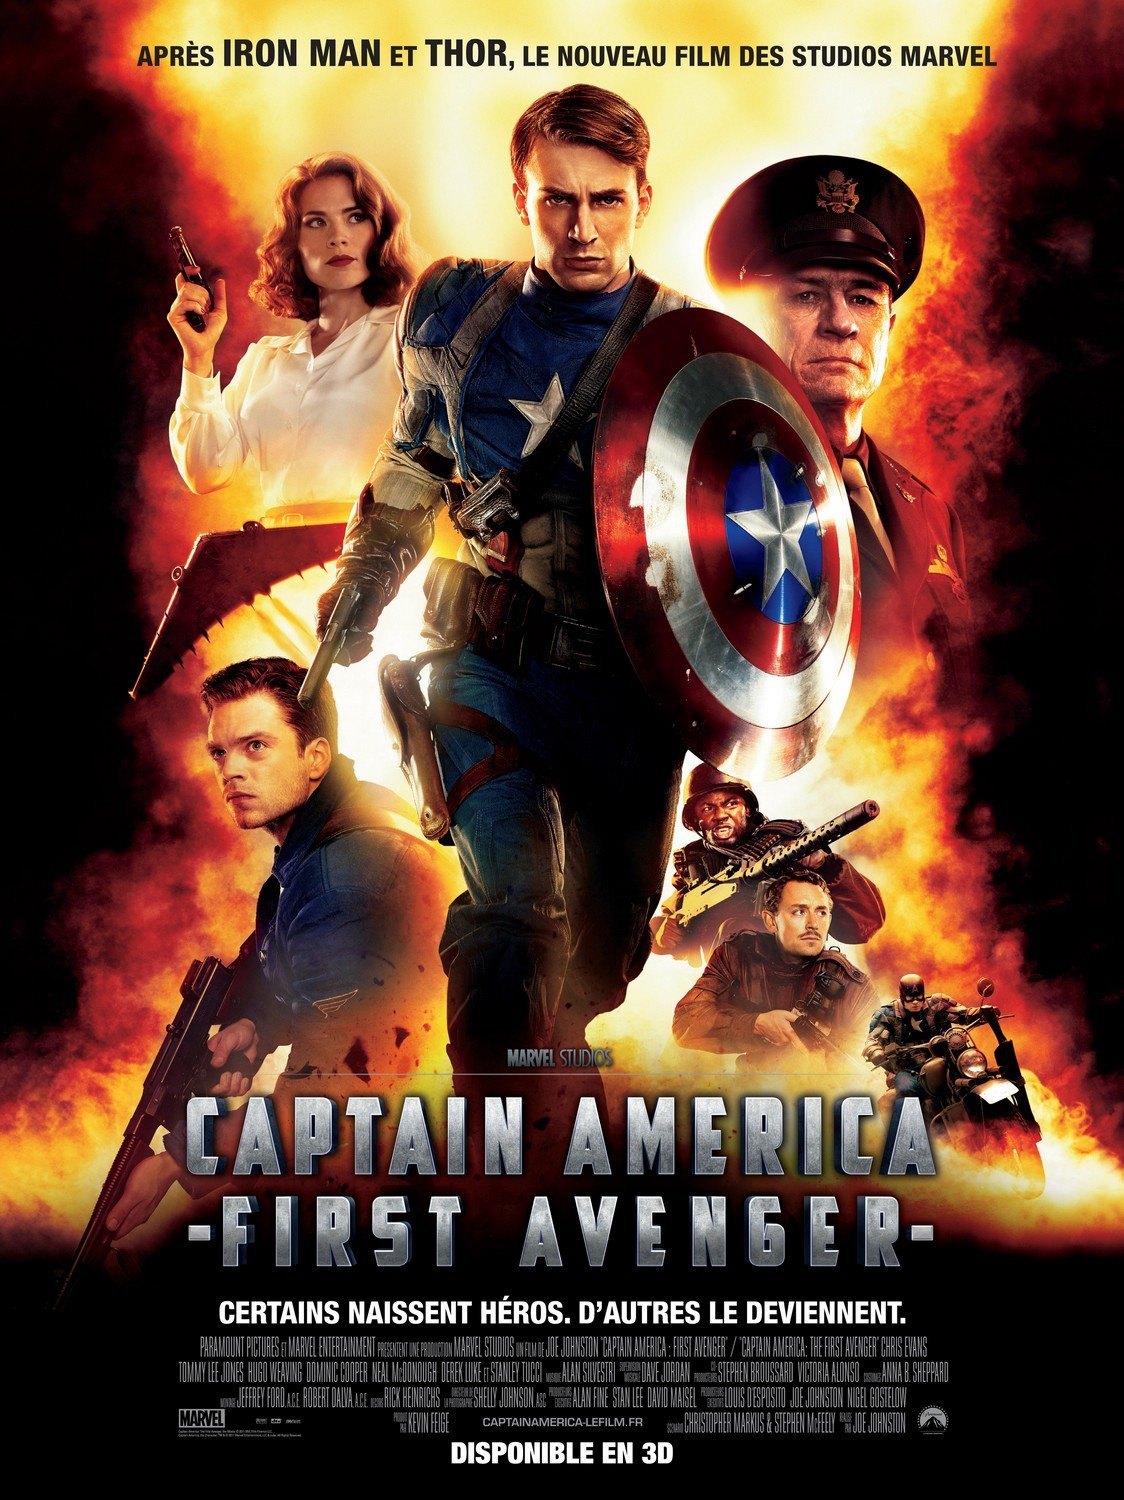 N4nation The French poster for Captain America The First